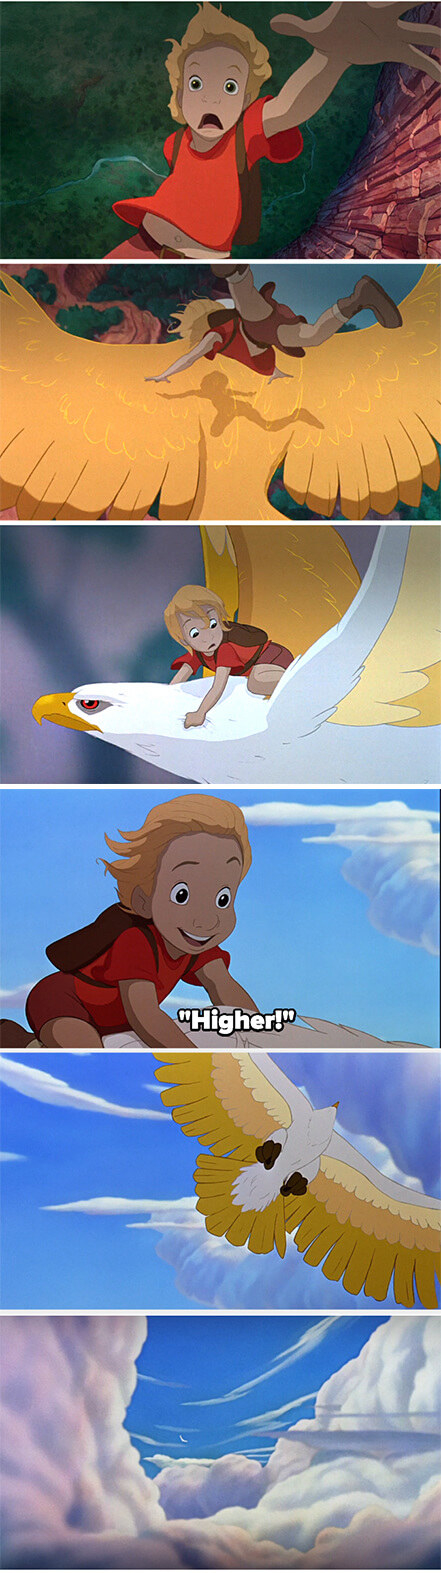 Screenshots from &quot;The Rescuers Down Under&quot;